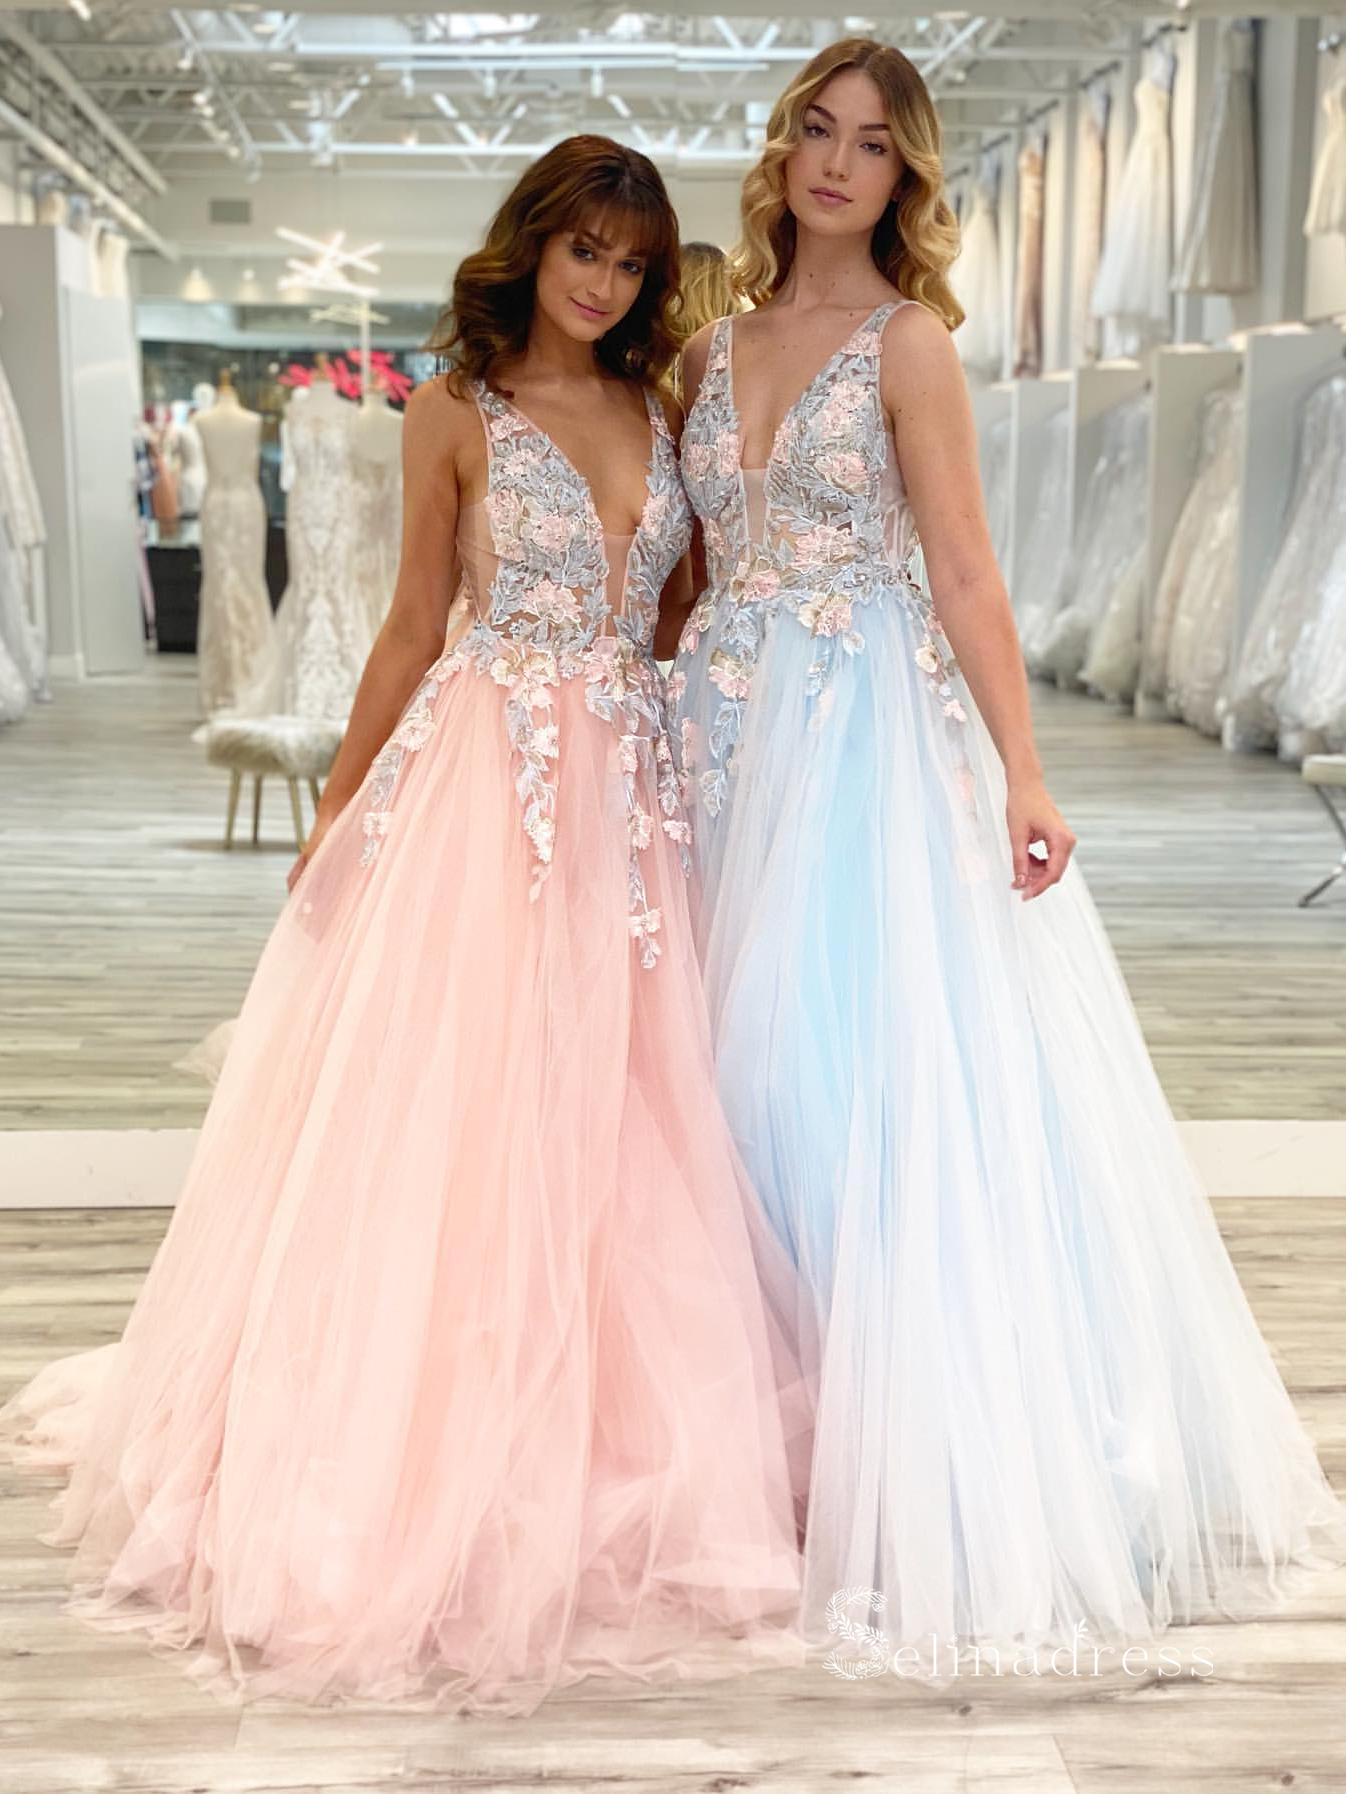 Beautiful Blushing Pink Beading Prom Dresses, Off the Shoulder Puffy S